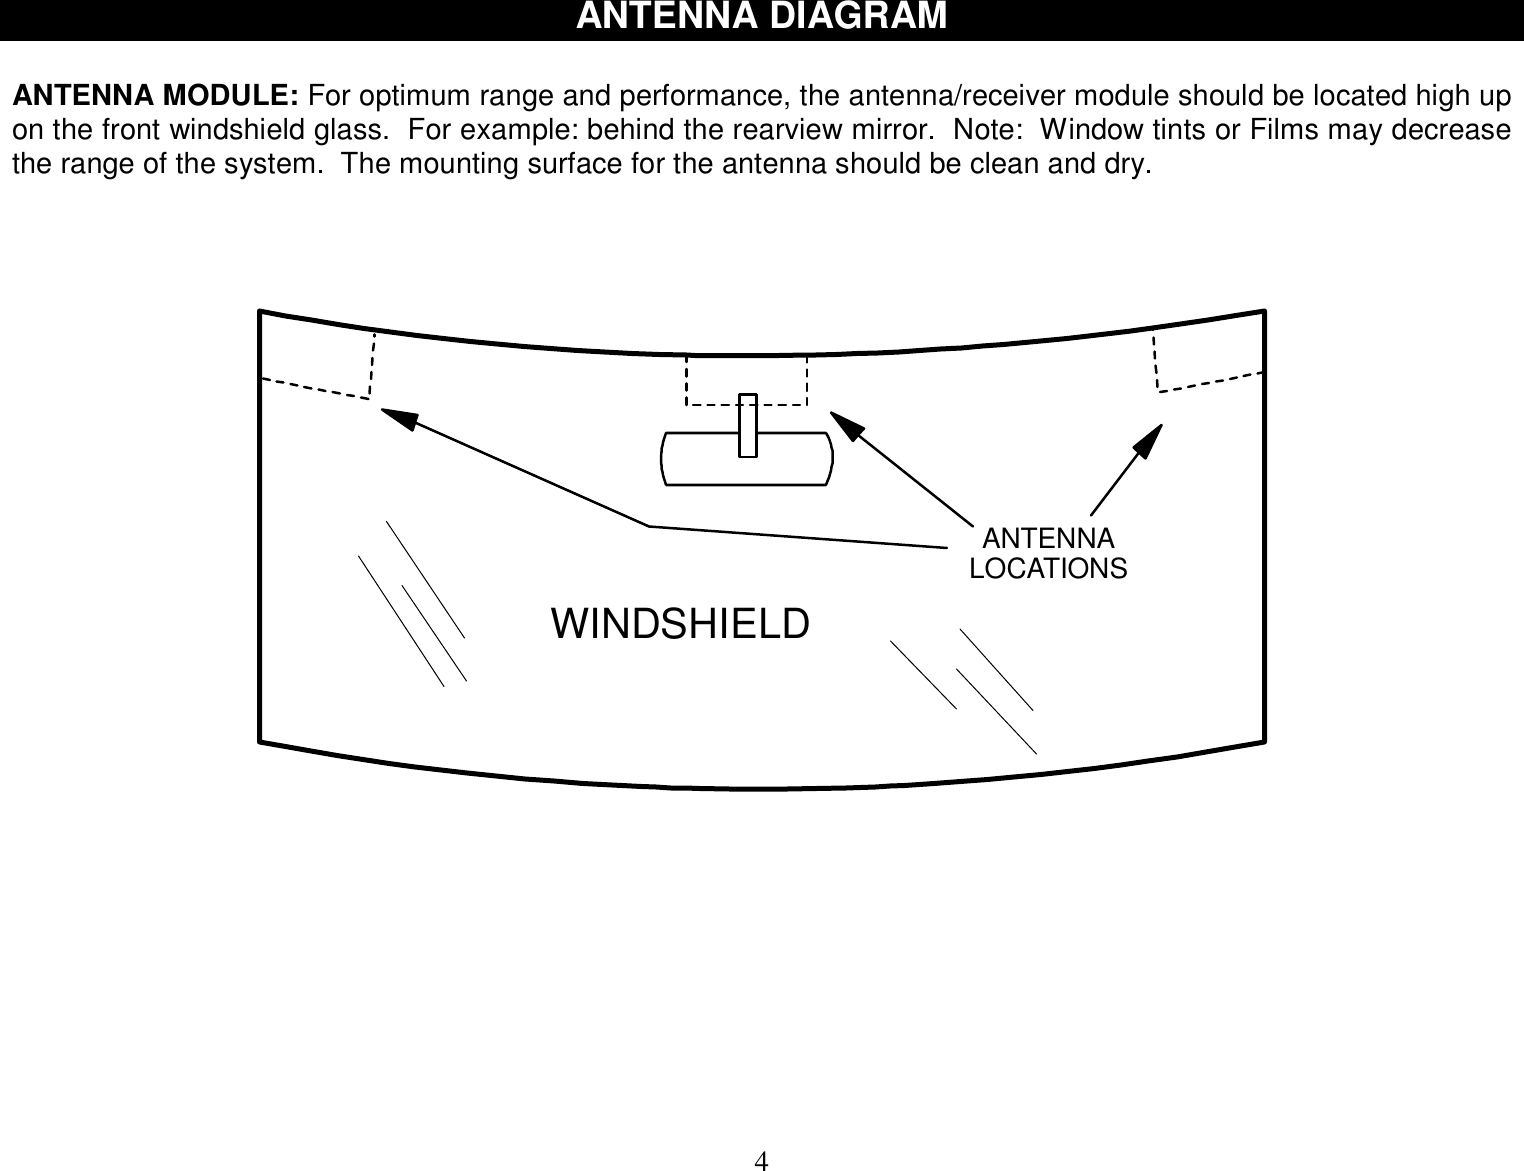  4 ANTENNA DIAGRAM   ANTENNA MODULE: For optimum range and performance, the antenna/receiver module should be located high up on the front windshield glass.  For example: behind the rearview mirror.  Note:  Window tints or Films may decrease the range of the system.  The mounting surface for the antenna should be clean and dry.     WINDSHIELDANTENNALOCATIONS           